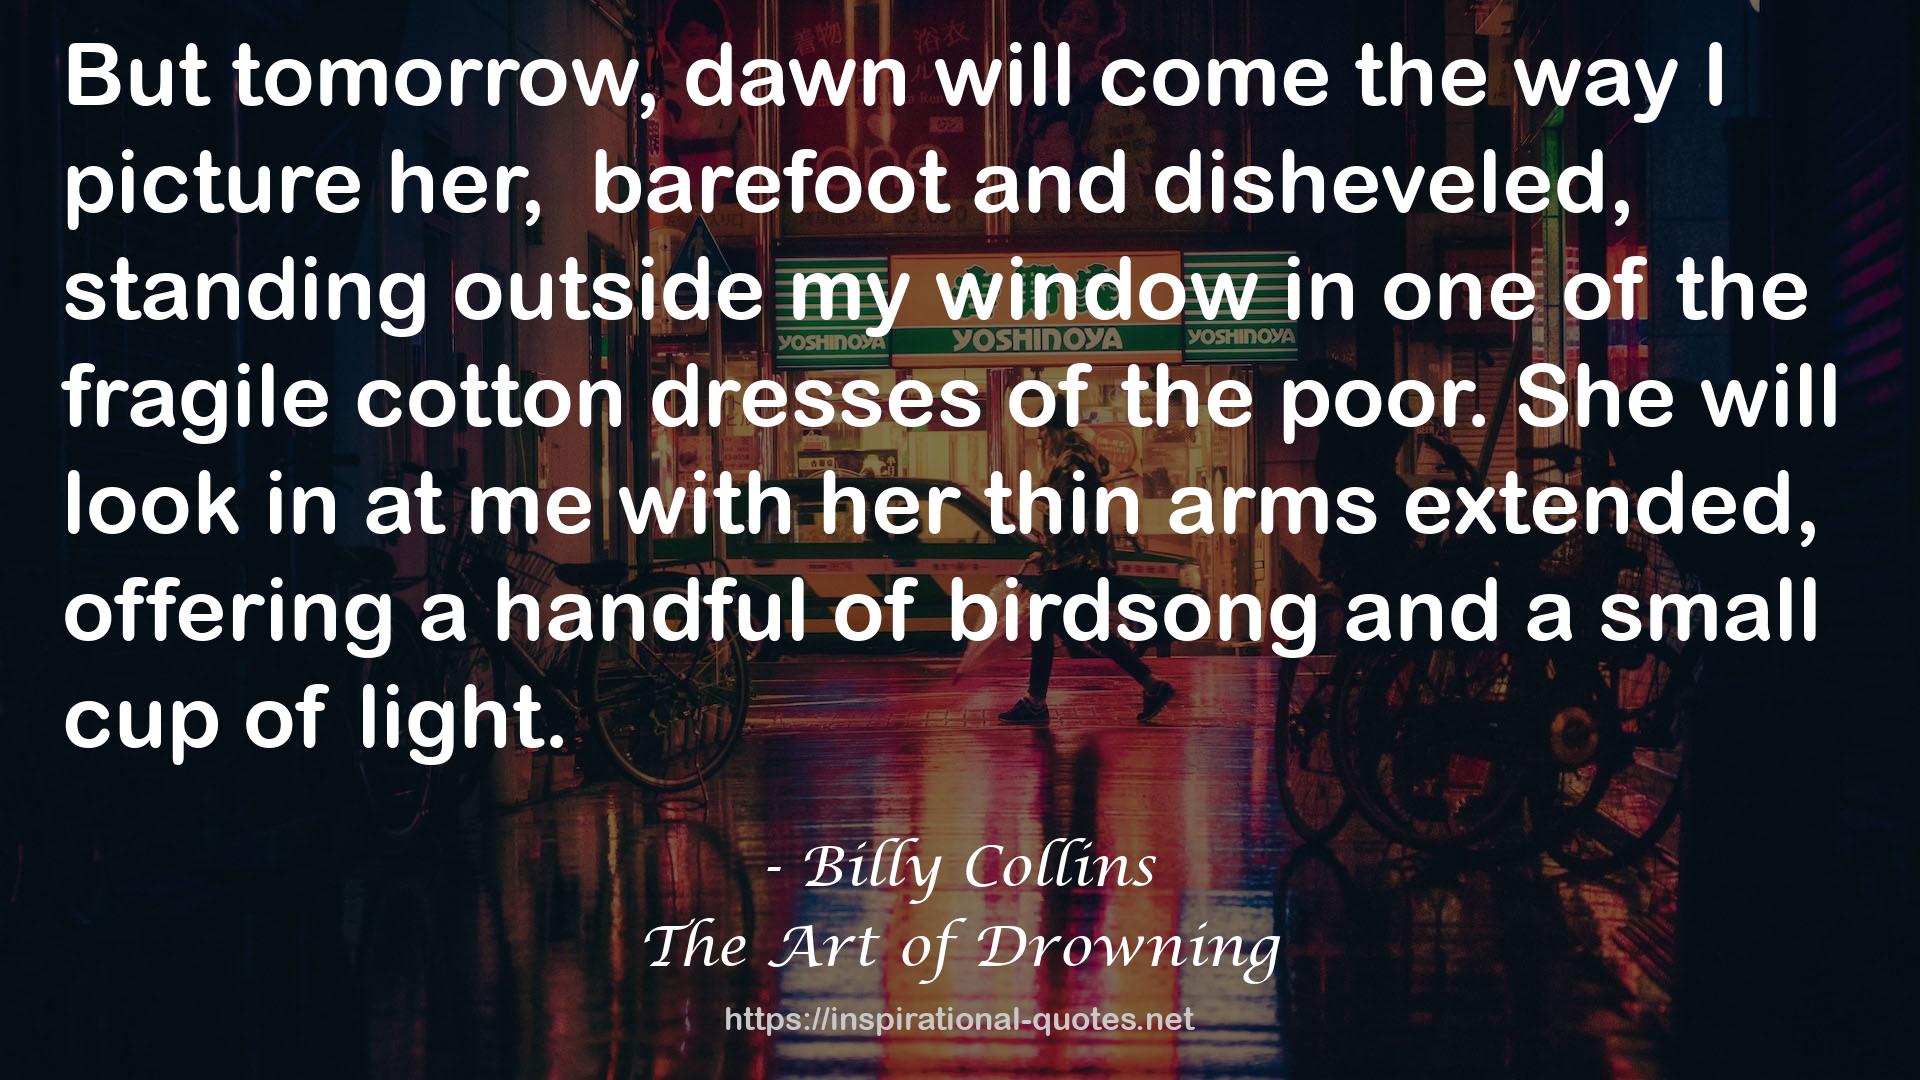 The Art of Drowning QUOTES